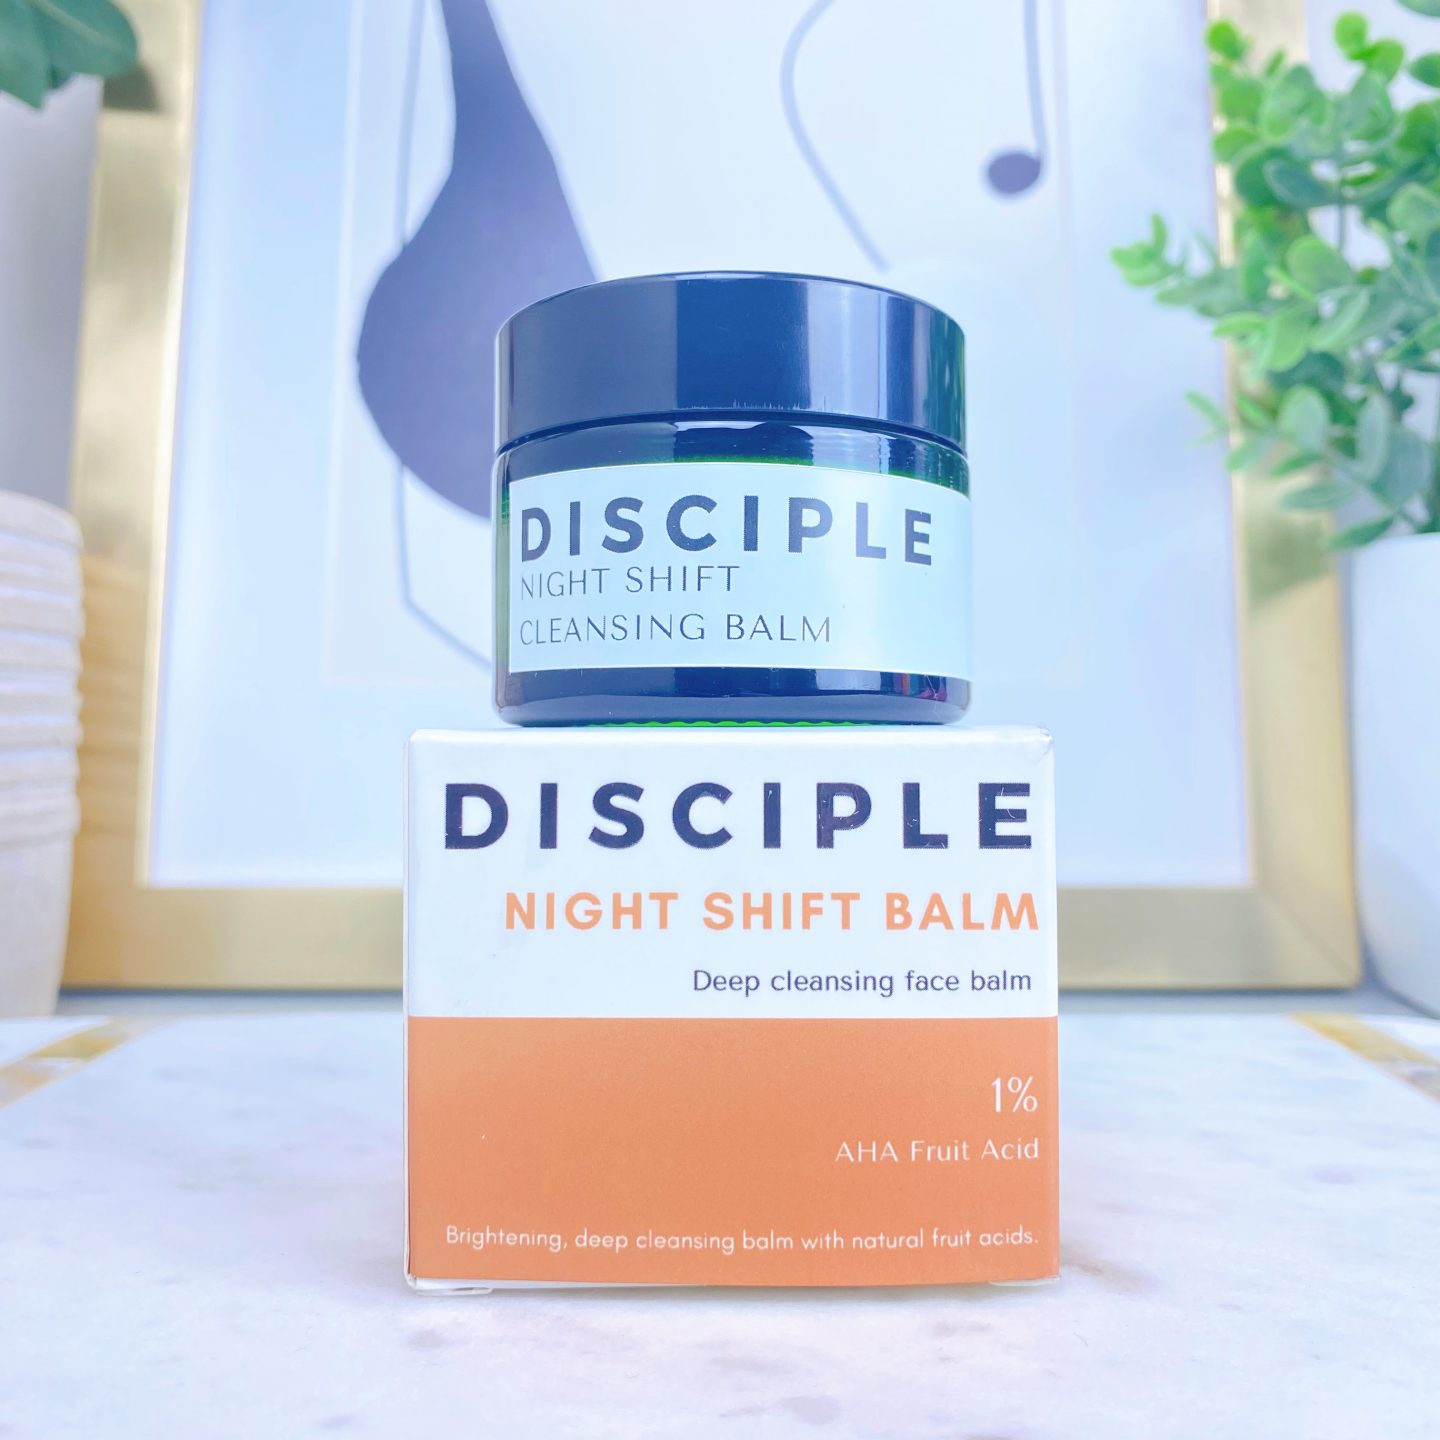 Disciple Night Shift Cleansing Balm